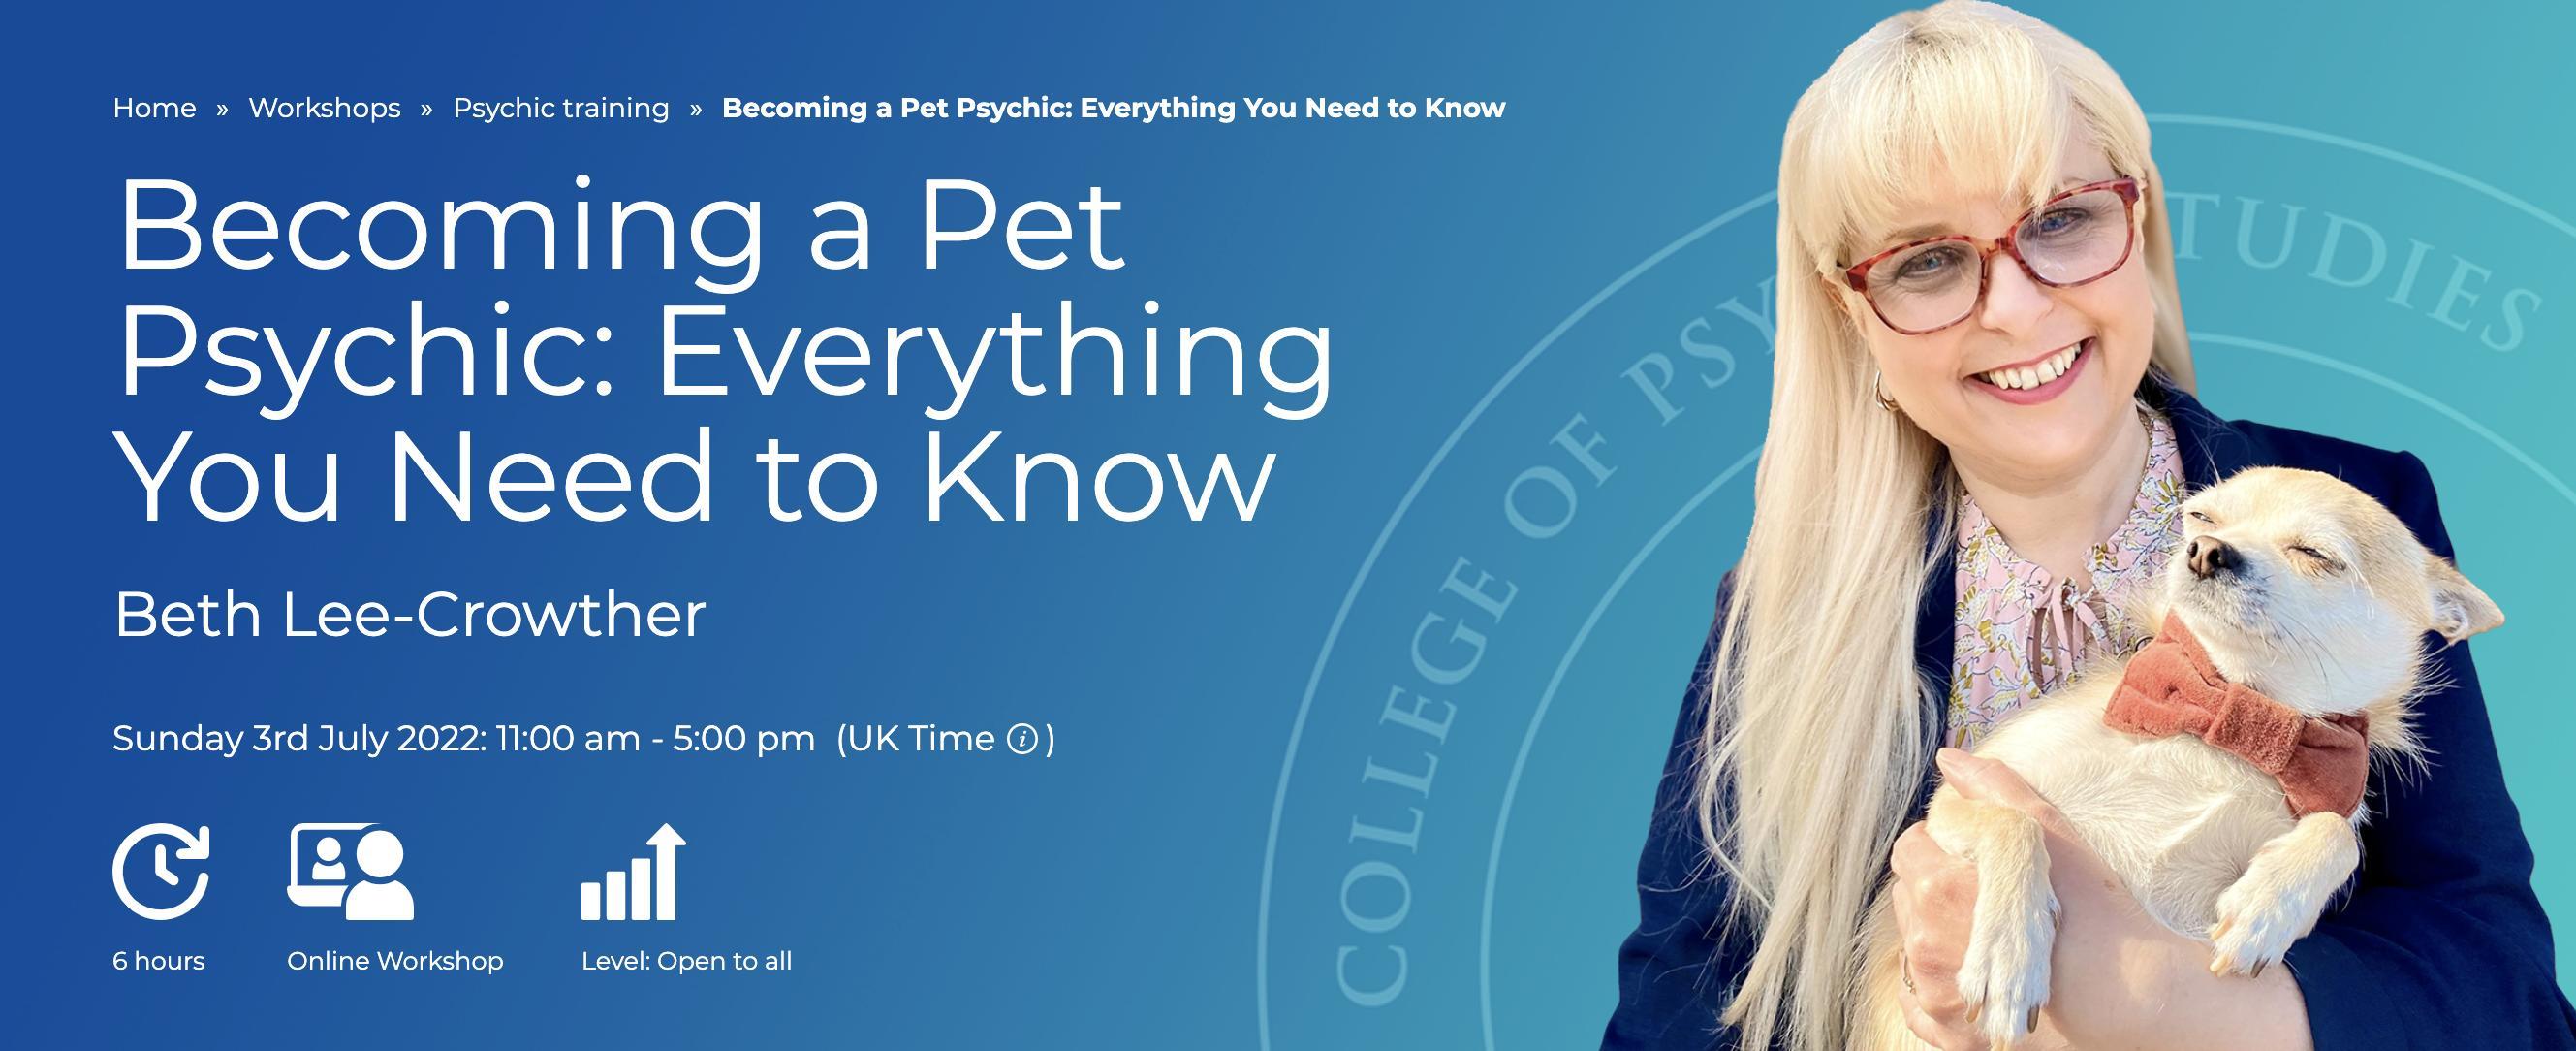 Banner for Becoming a Pet Psychic workshop with link